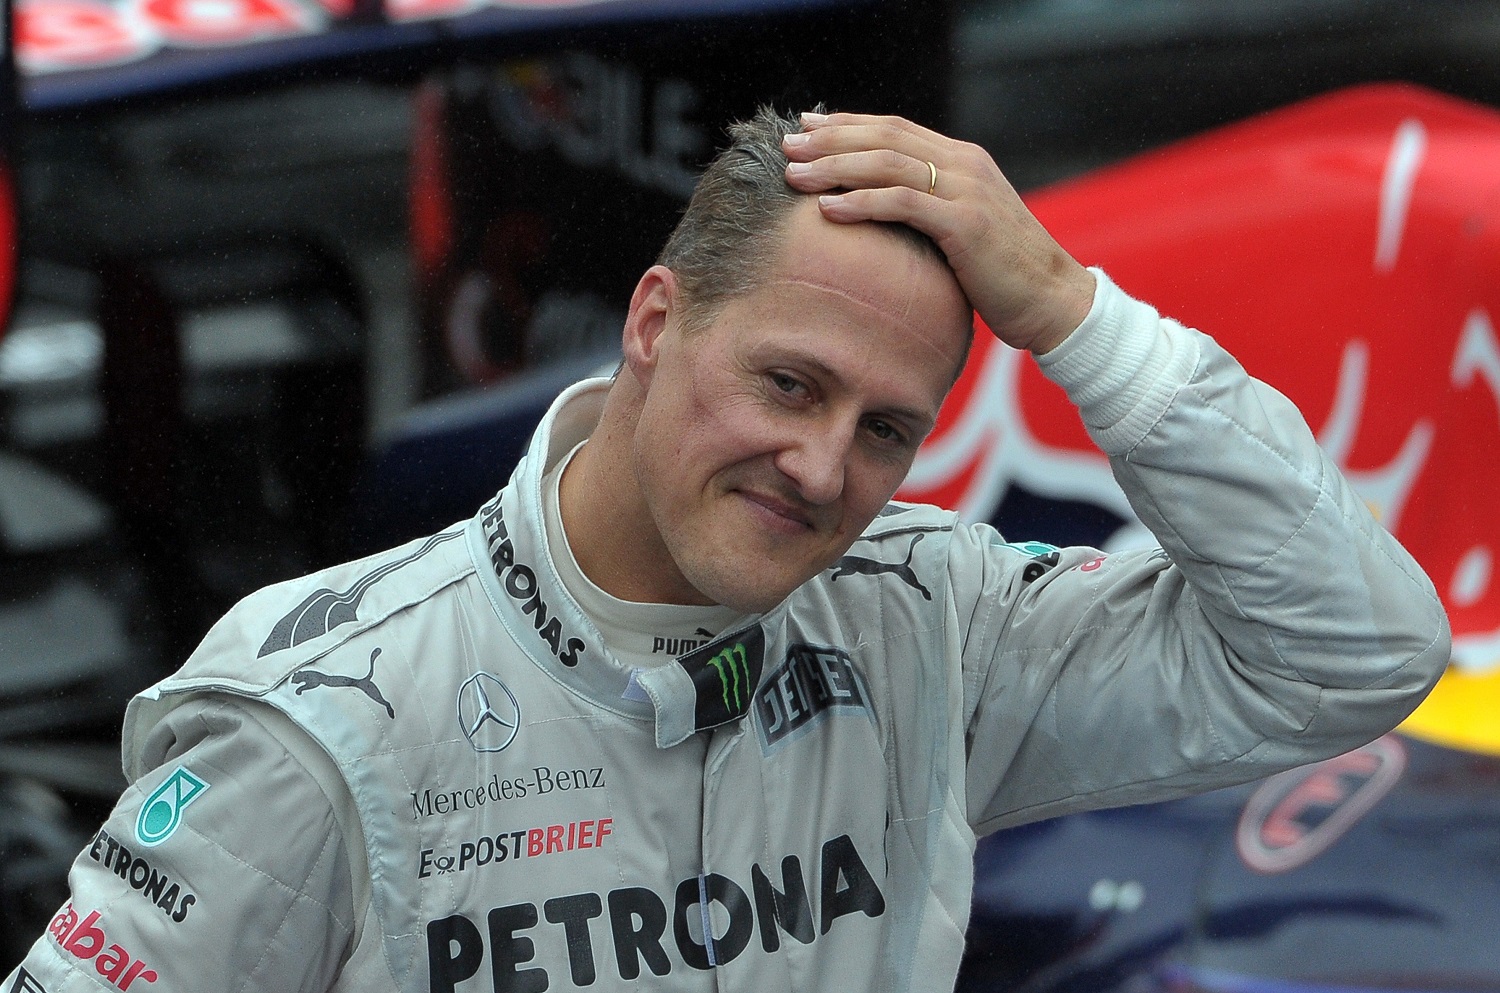 German Formula 1 driver Michael Schumacher gestures at the end of the Brazilian GP on Nov. 25, 2012.